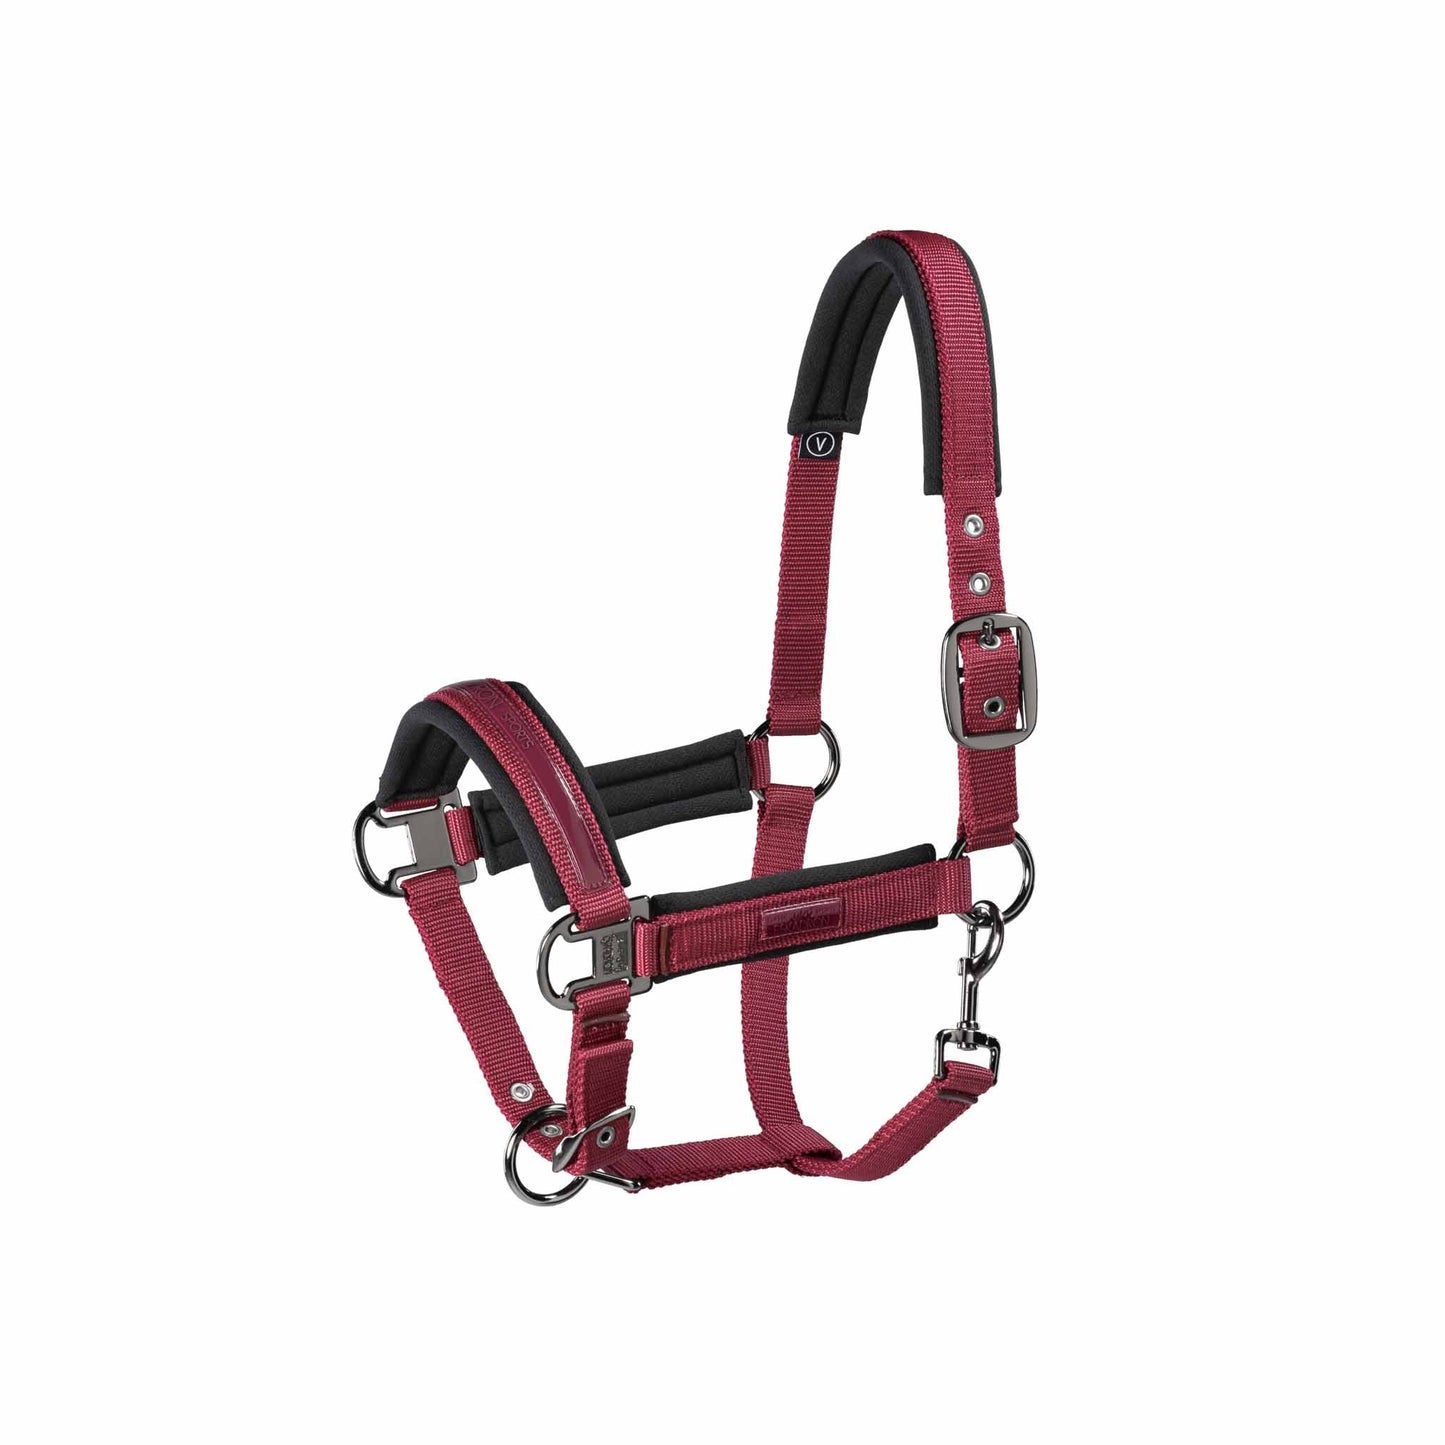 Licol Pin Buckle, Rustic red - Eskadron Classic Sports AH 21